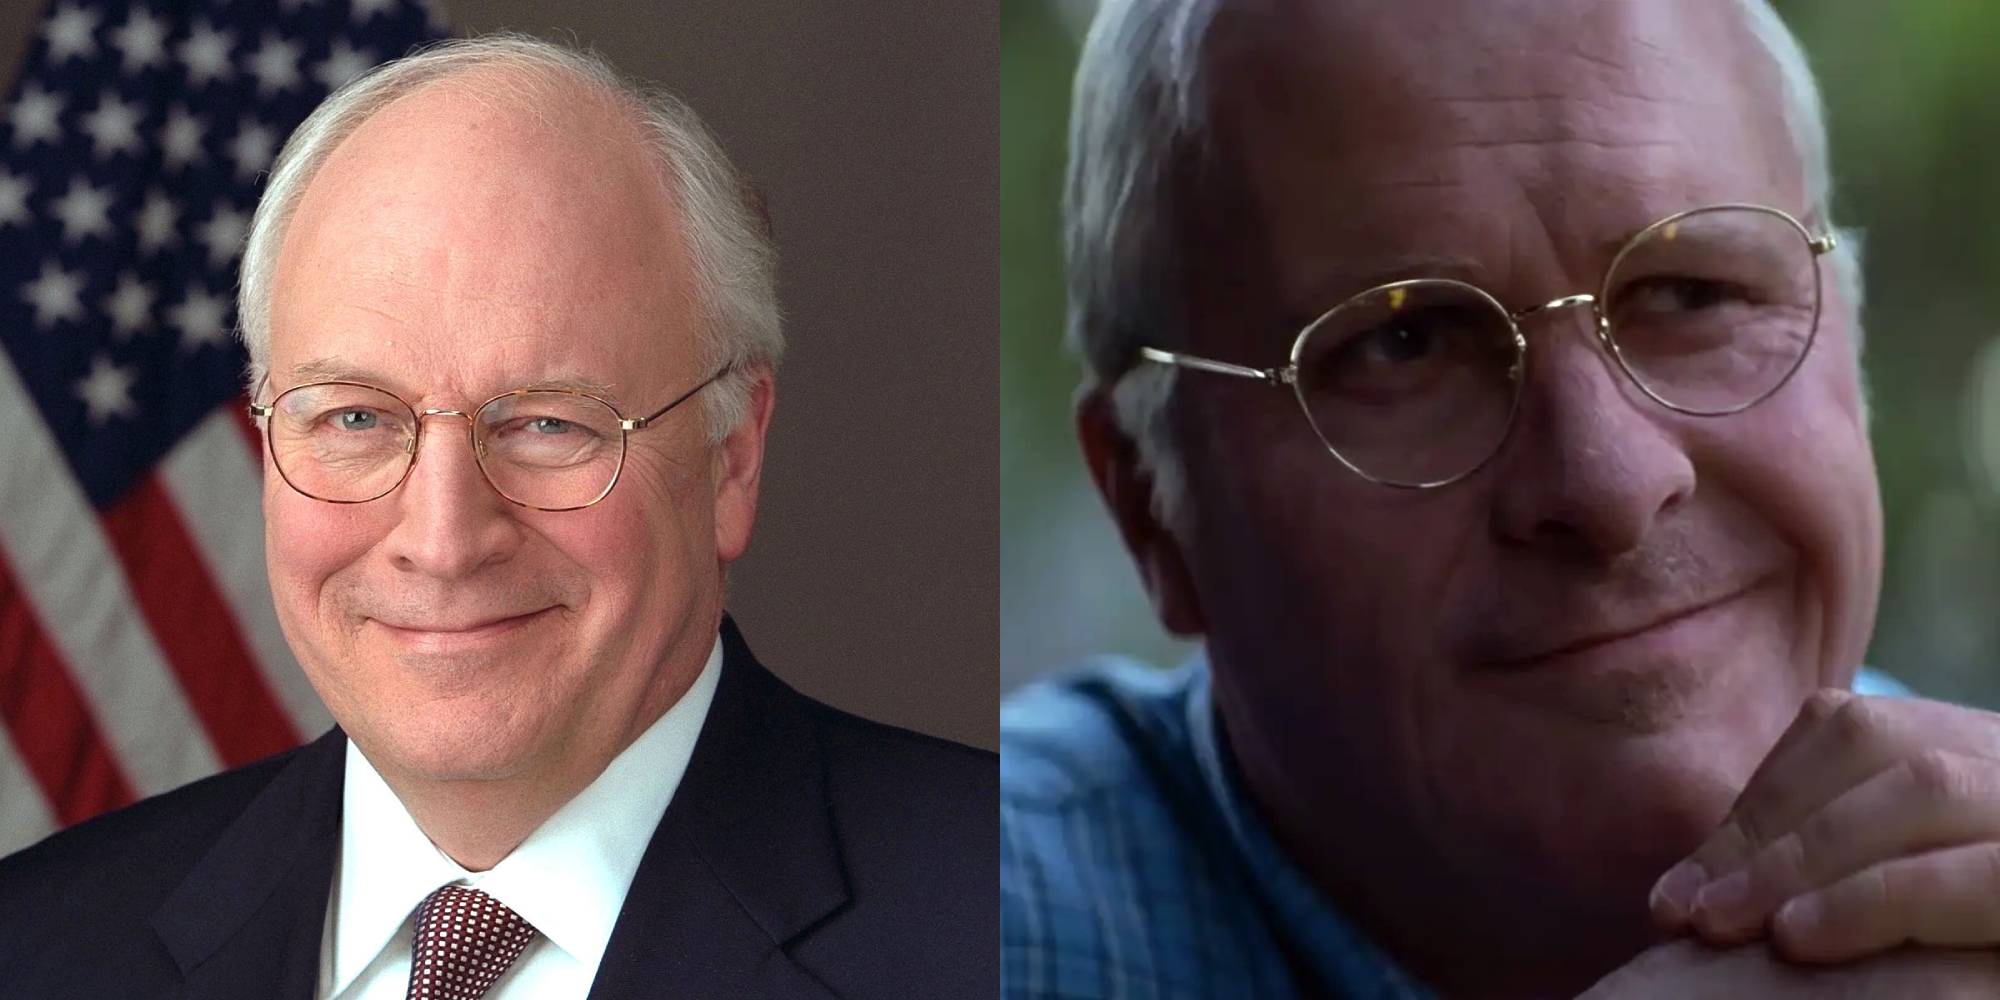 Who played dick cheney in movie